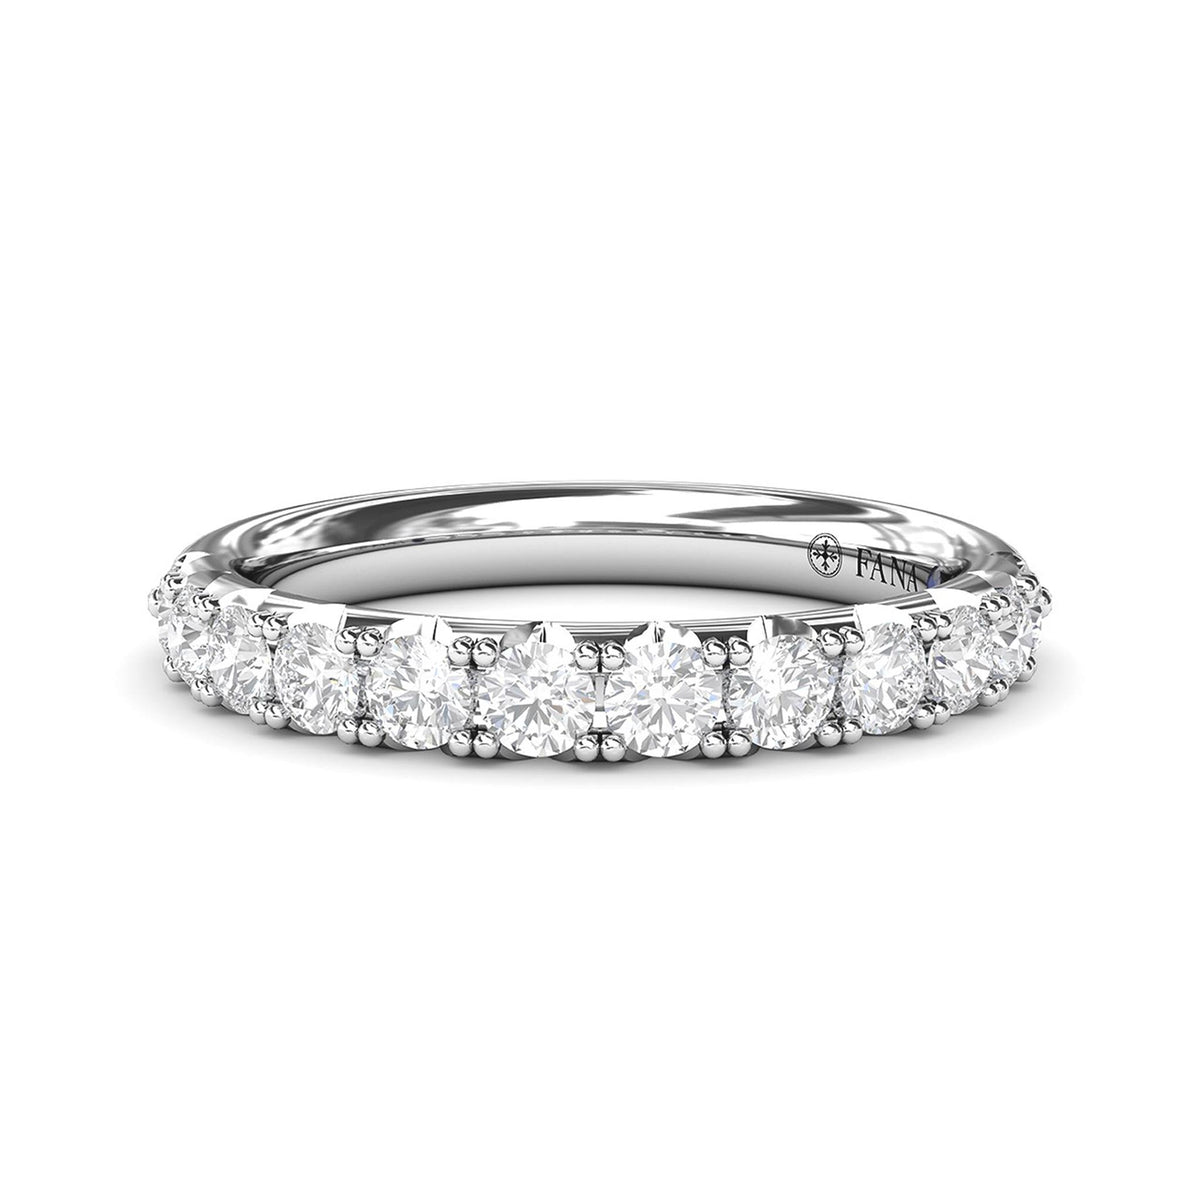 14Kt White Gold Prong Set Wedding Ring With 0.66cttw Natural Diamonds